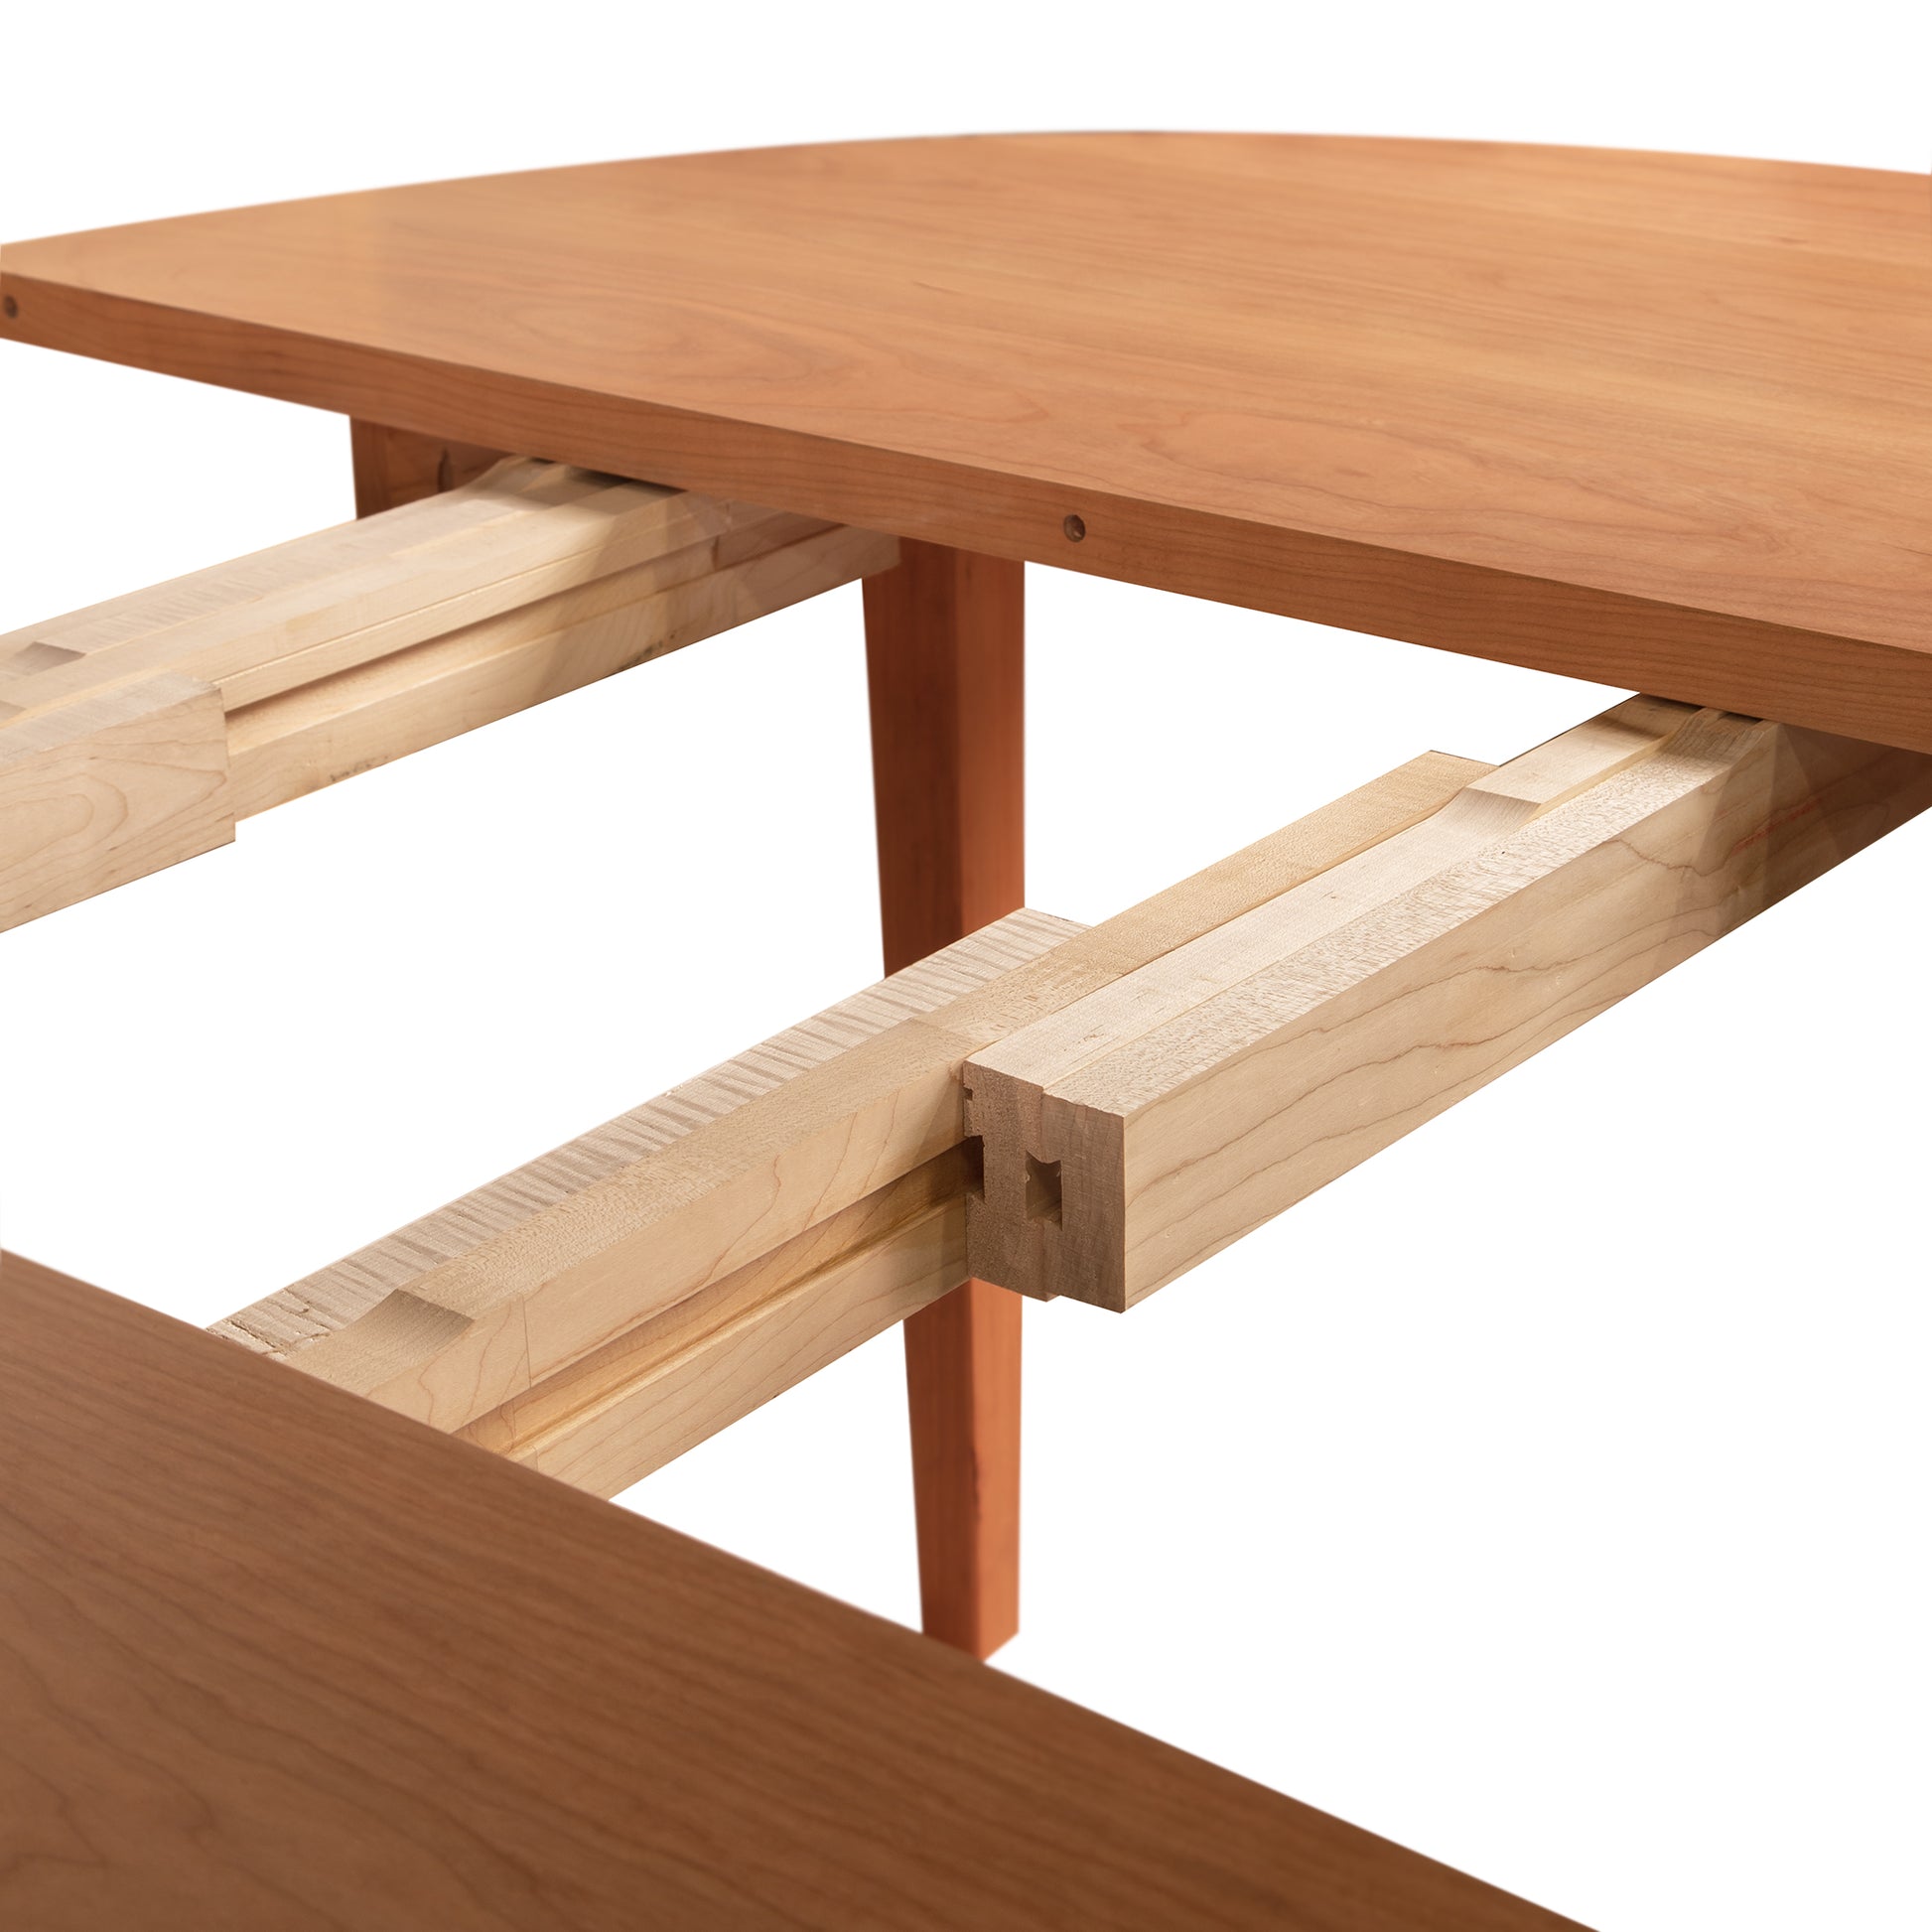 Close-up of a Maple Corner Woodworks Vermont Shaker Round Extension Table showing detailed joinery and craftsmanship, focusing on the intersection of the table legs and support beams on a white background.